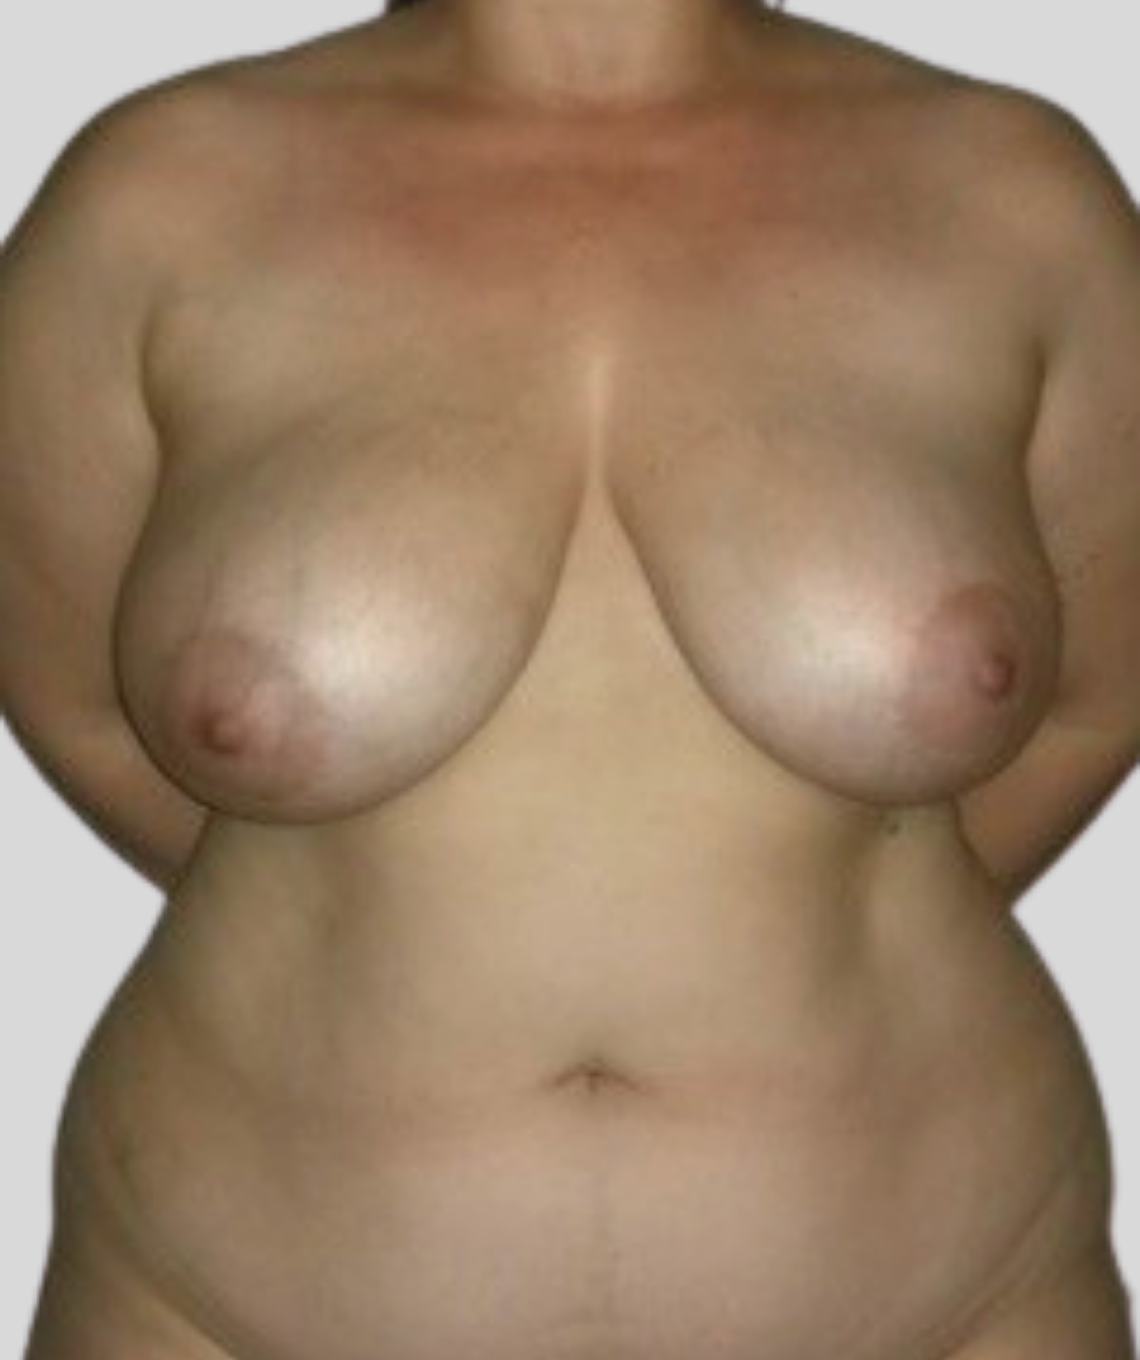 DIEP - before and after photos - before - prma plastic surgery - case 000